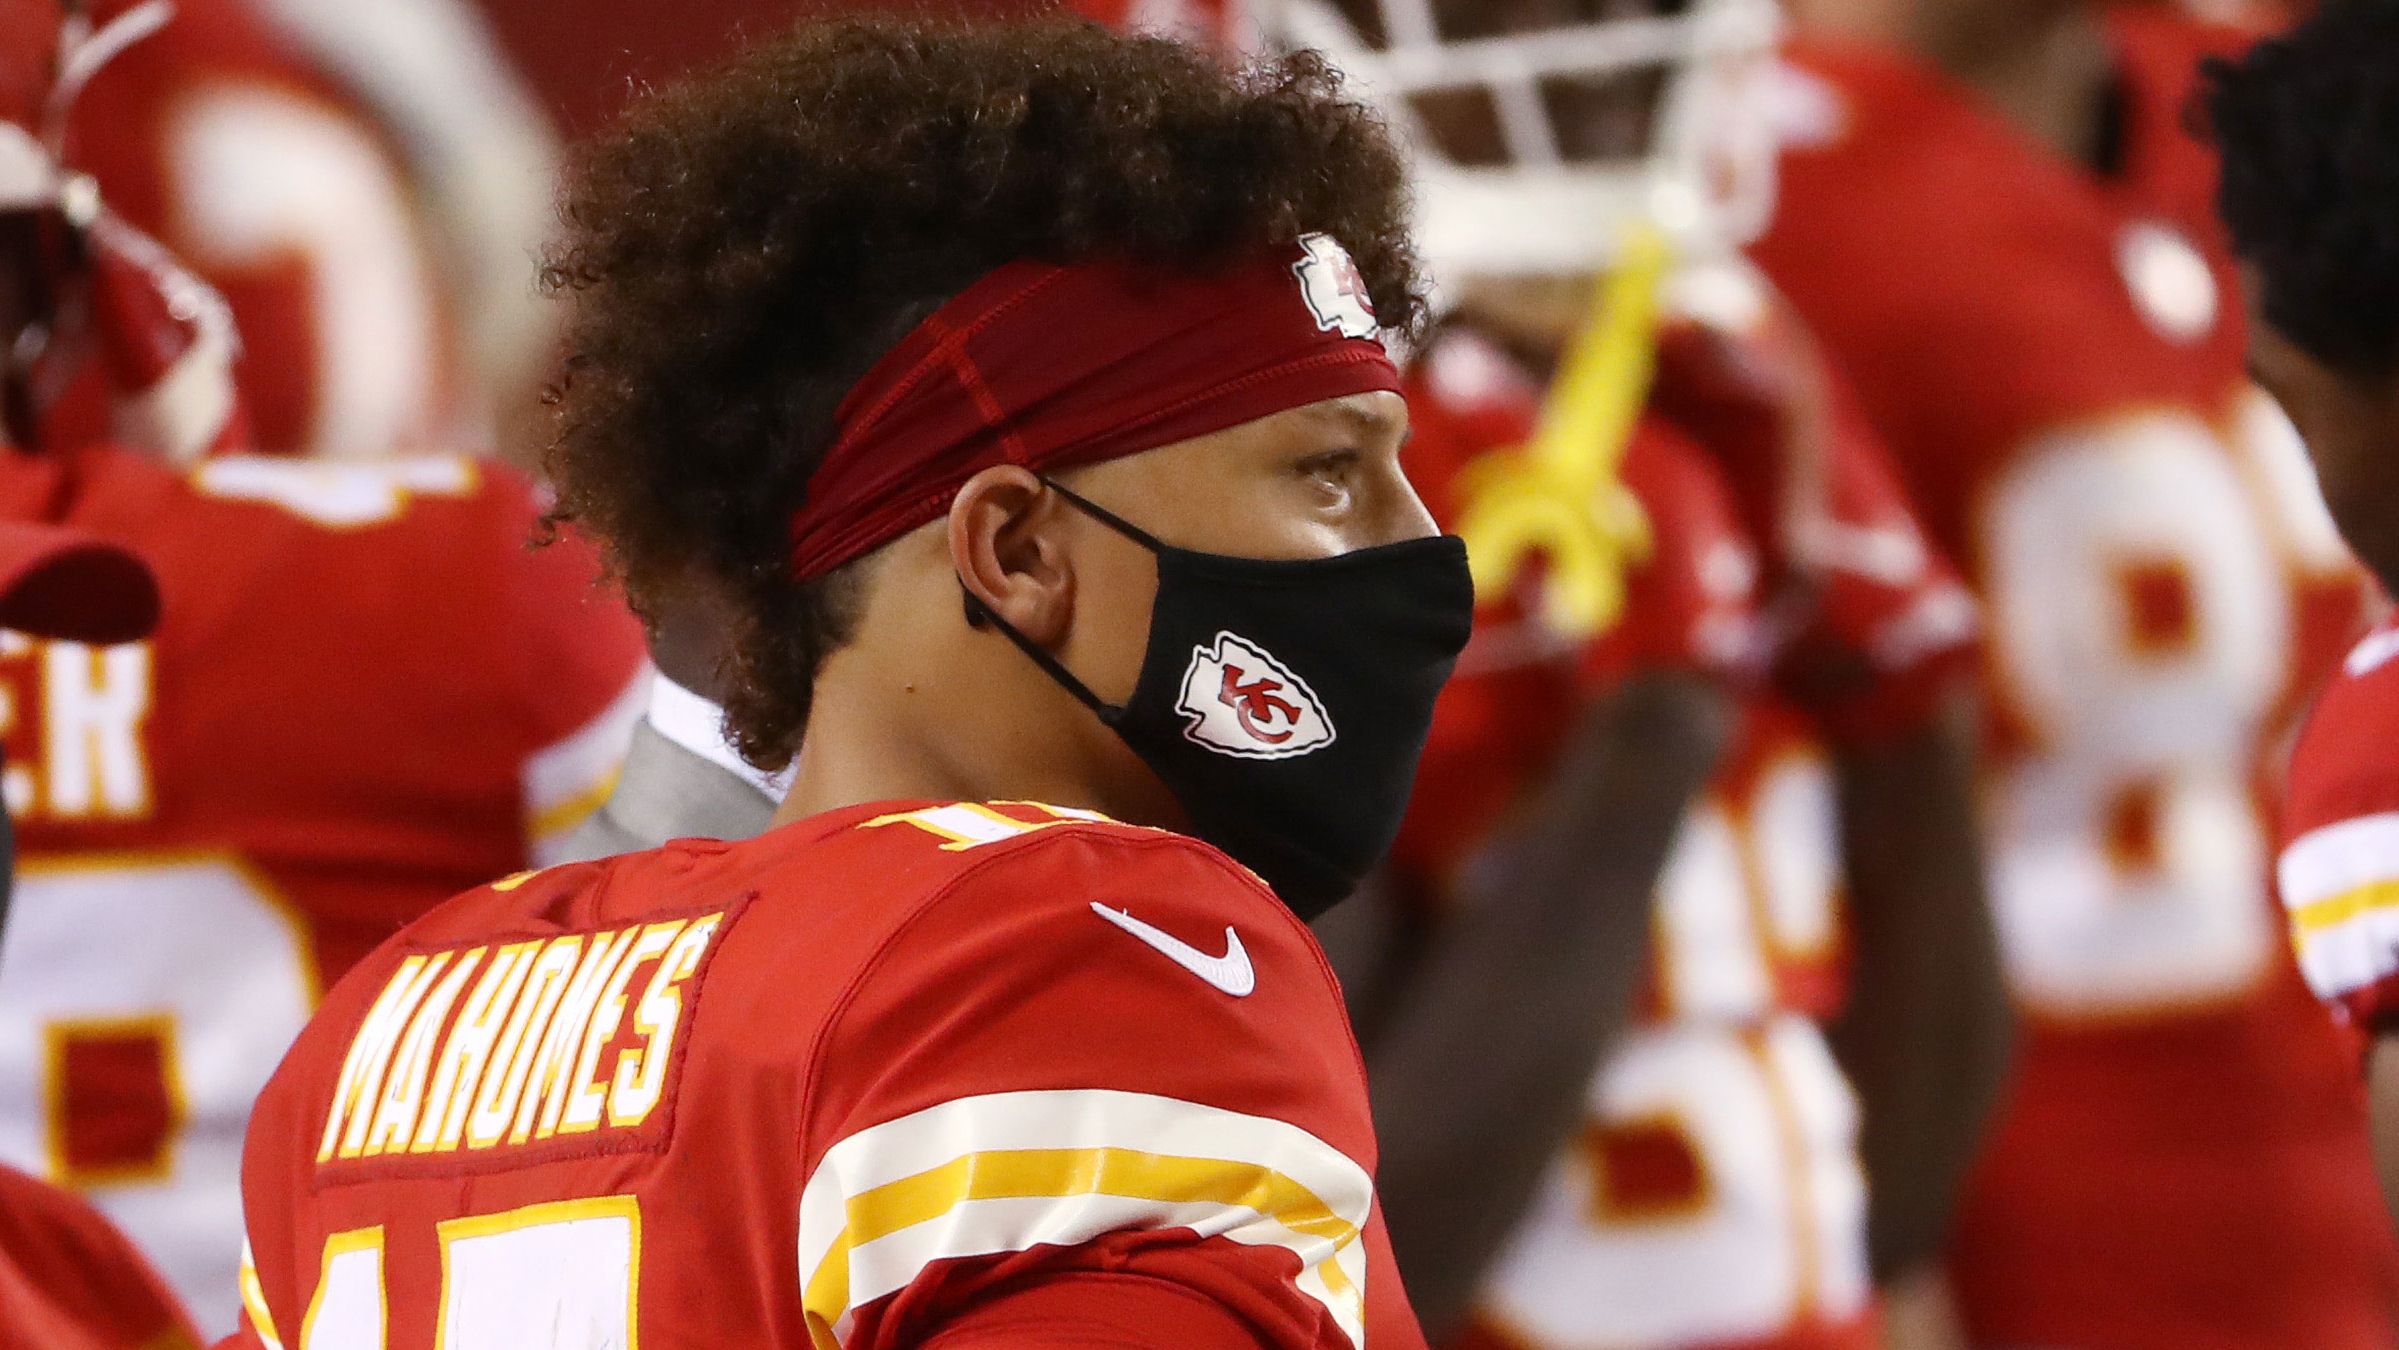 Patrick Mahomes of the Kansas City Chiefs dons a mask on the sideline earlier this season.